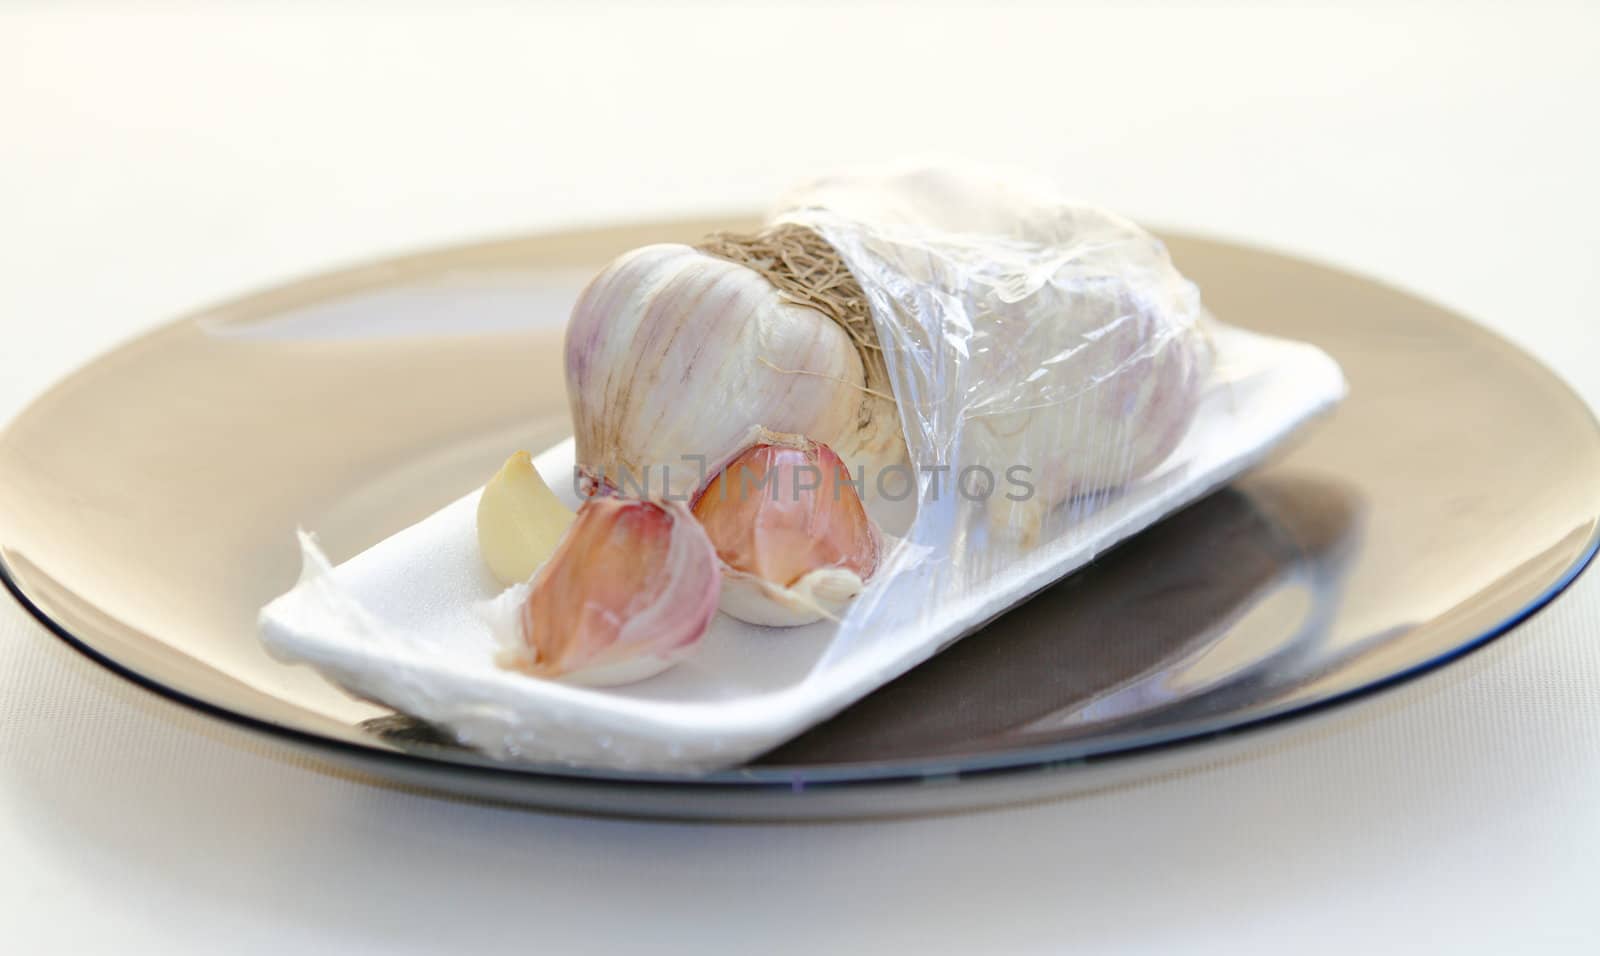 garlic in a package by victorych